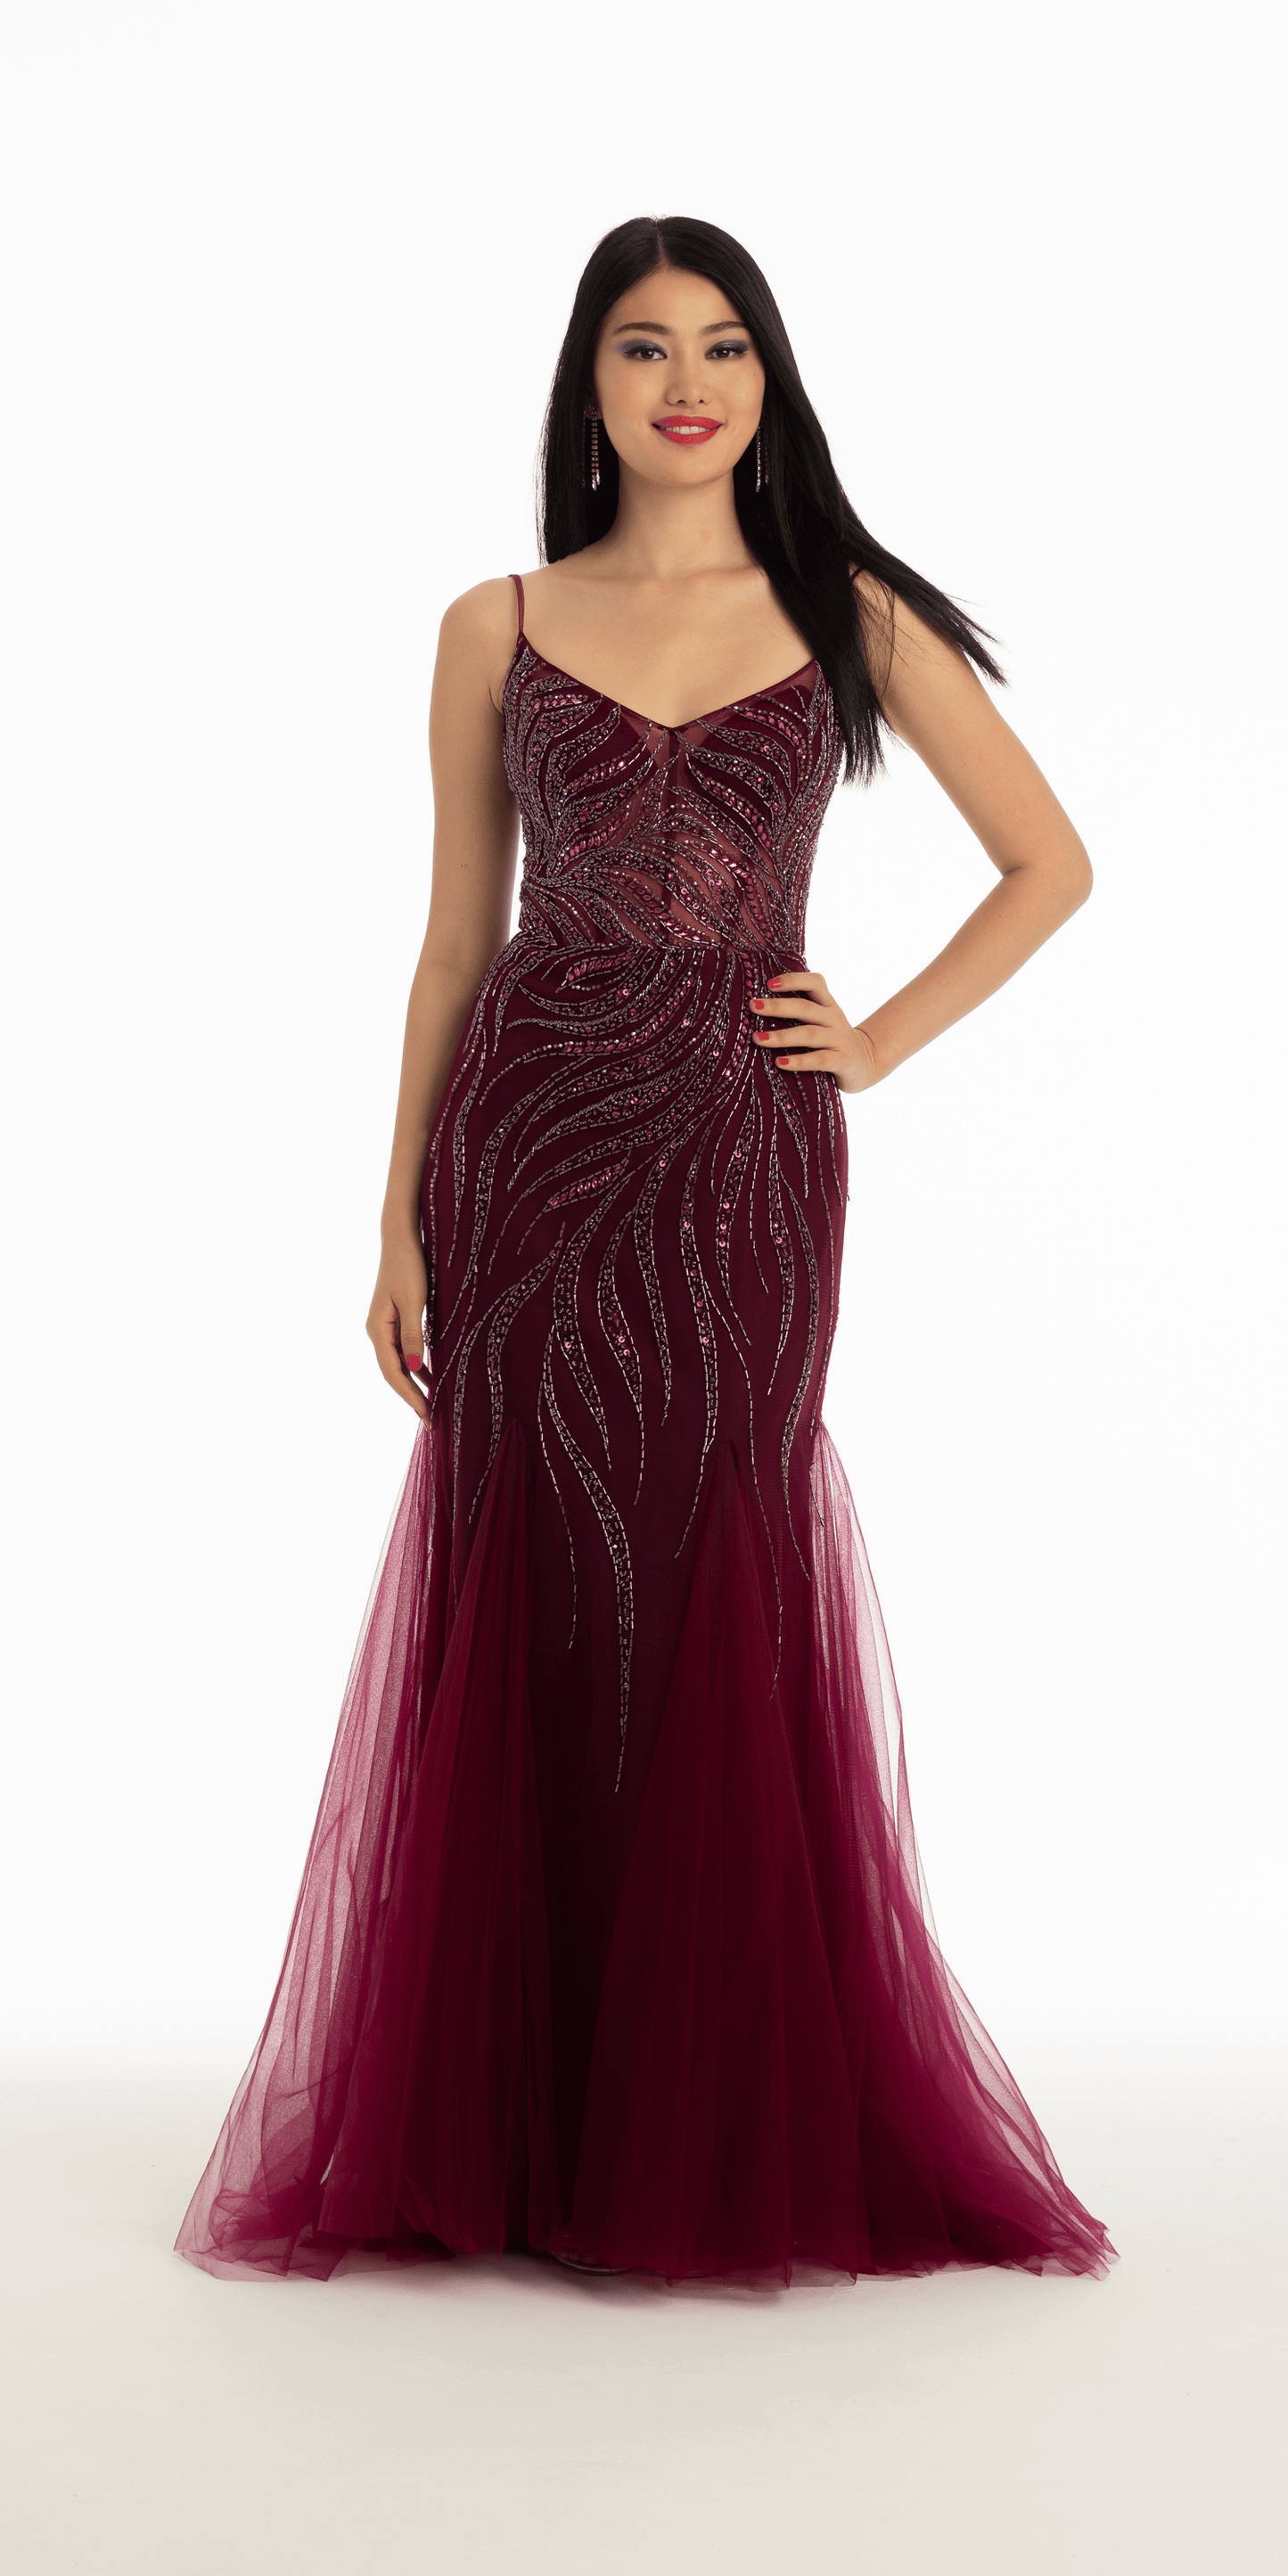 Camille La Vie Vine Beaded Sweetheart Tulle Mermaid  Dress with Godets